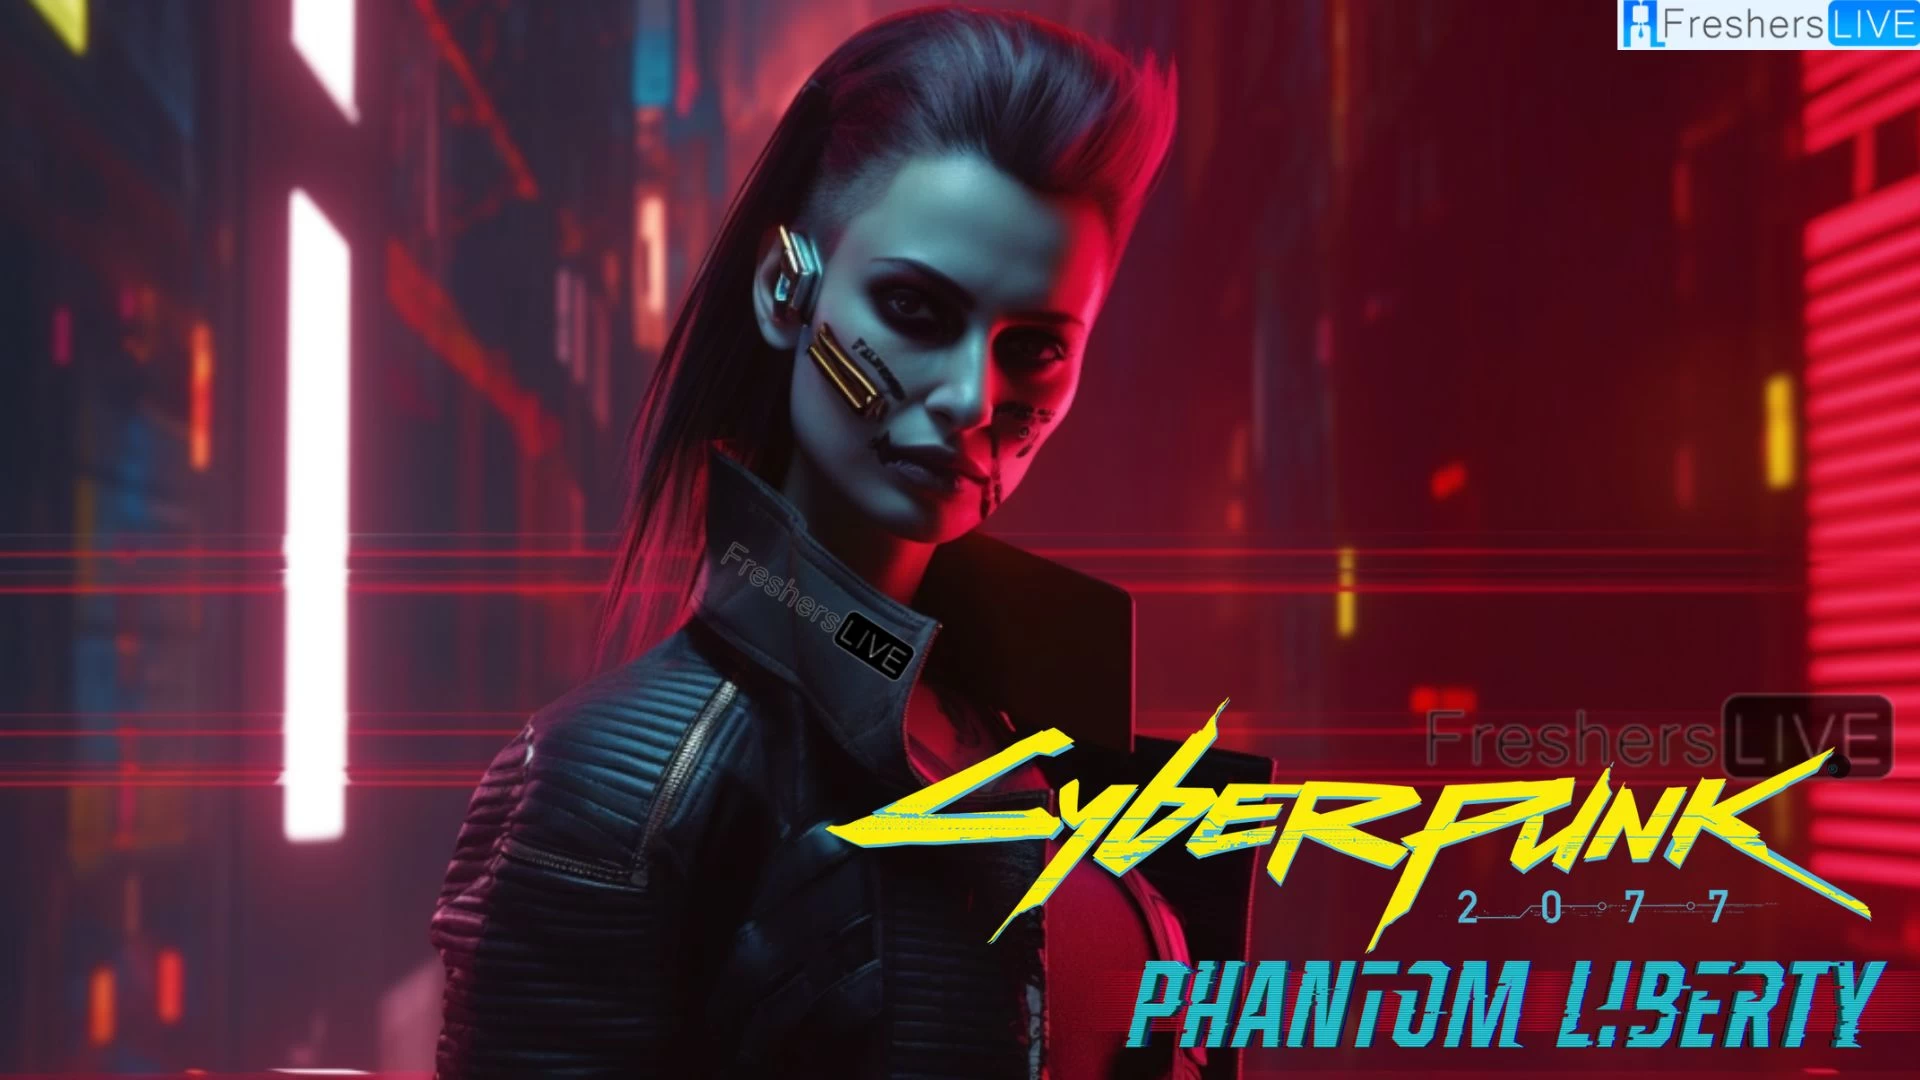 How to Complete Talent Academy in Cyberpunk 2077? Find Out Here